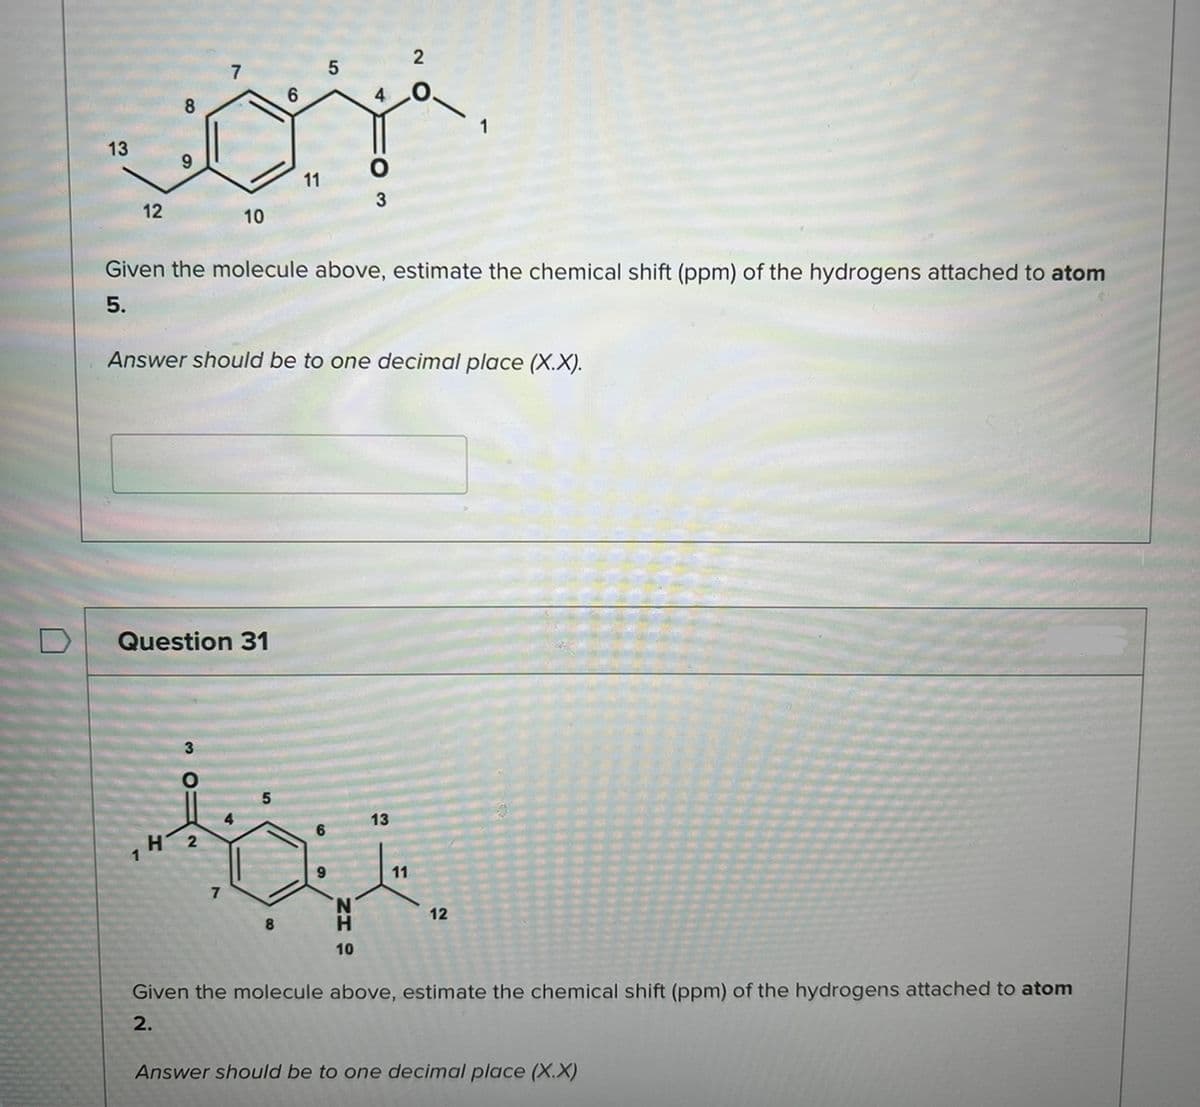 13
12
8
9
1
7
Question 31
O
H 2
10
7
4
Given the molecule above, estimate the chemical shift (ppm) of the hydrogens attached to atom
5.
6
Answer should be to one decimal place (X.X).
5
11
8
5
4
9
3
H
10
2
O
13
11
1
12
Given the molecule above, estimate the chemical shift (ppm) of the hydrogens attached to atom
2.
Answer should be to one decimal place (X.X)